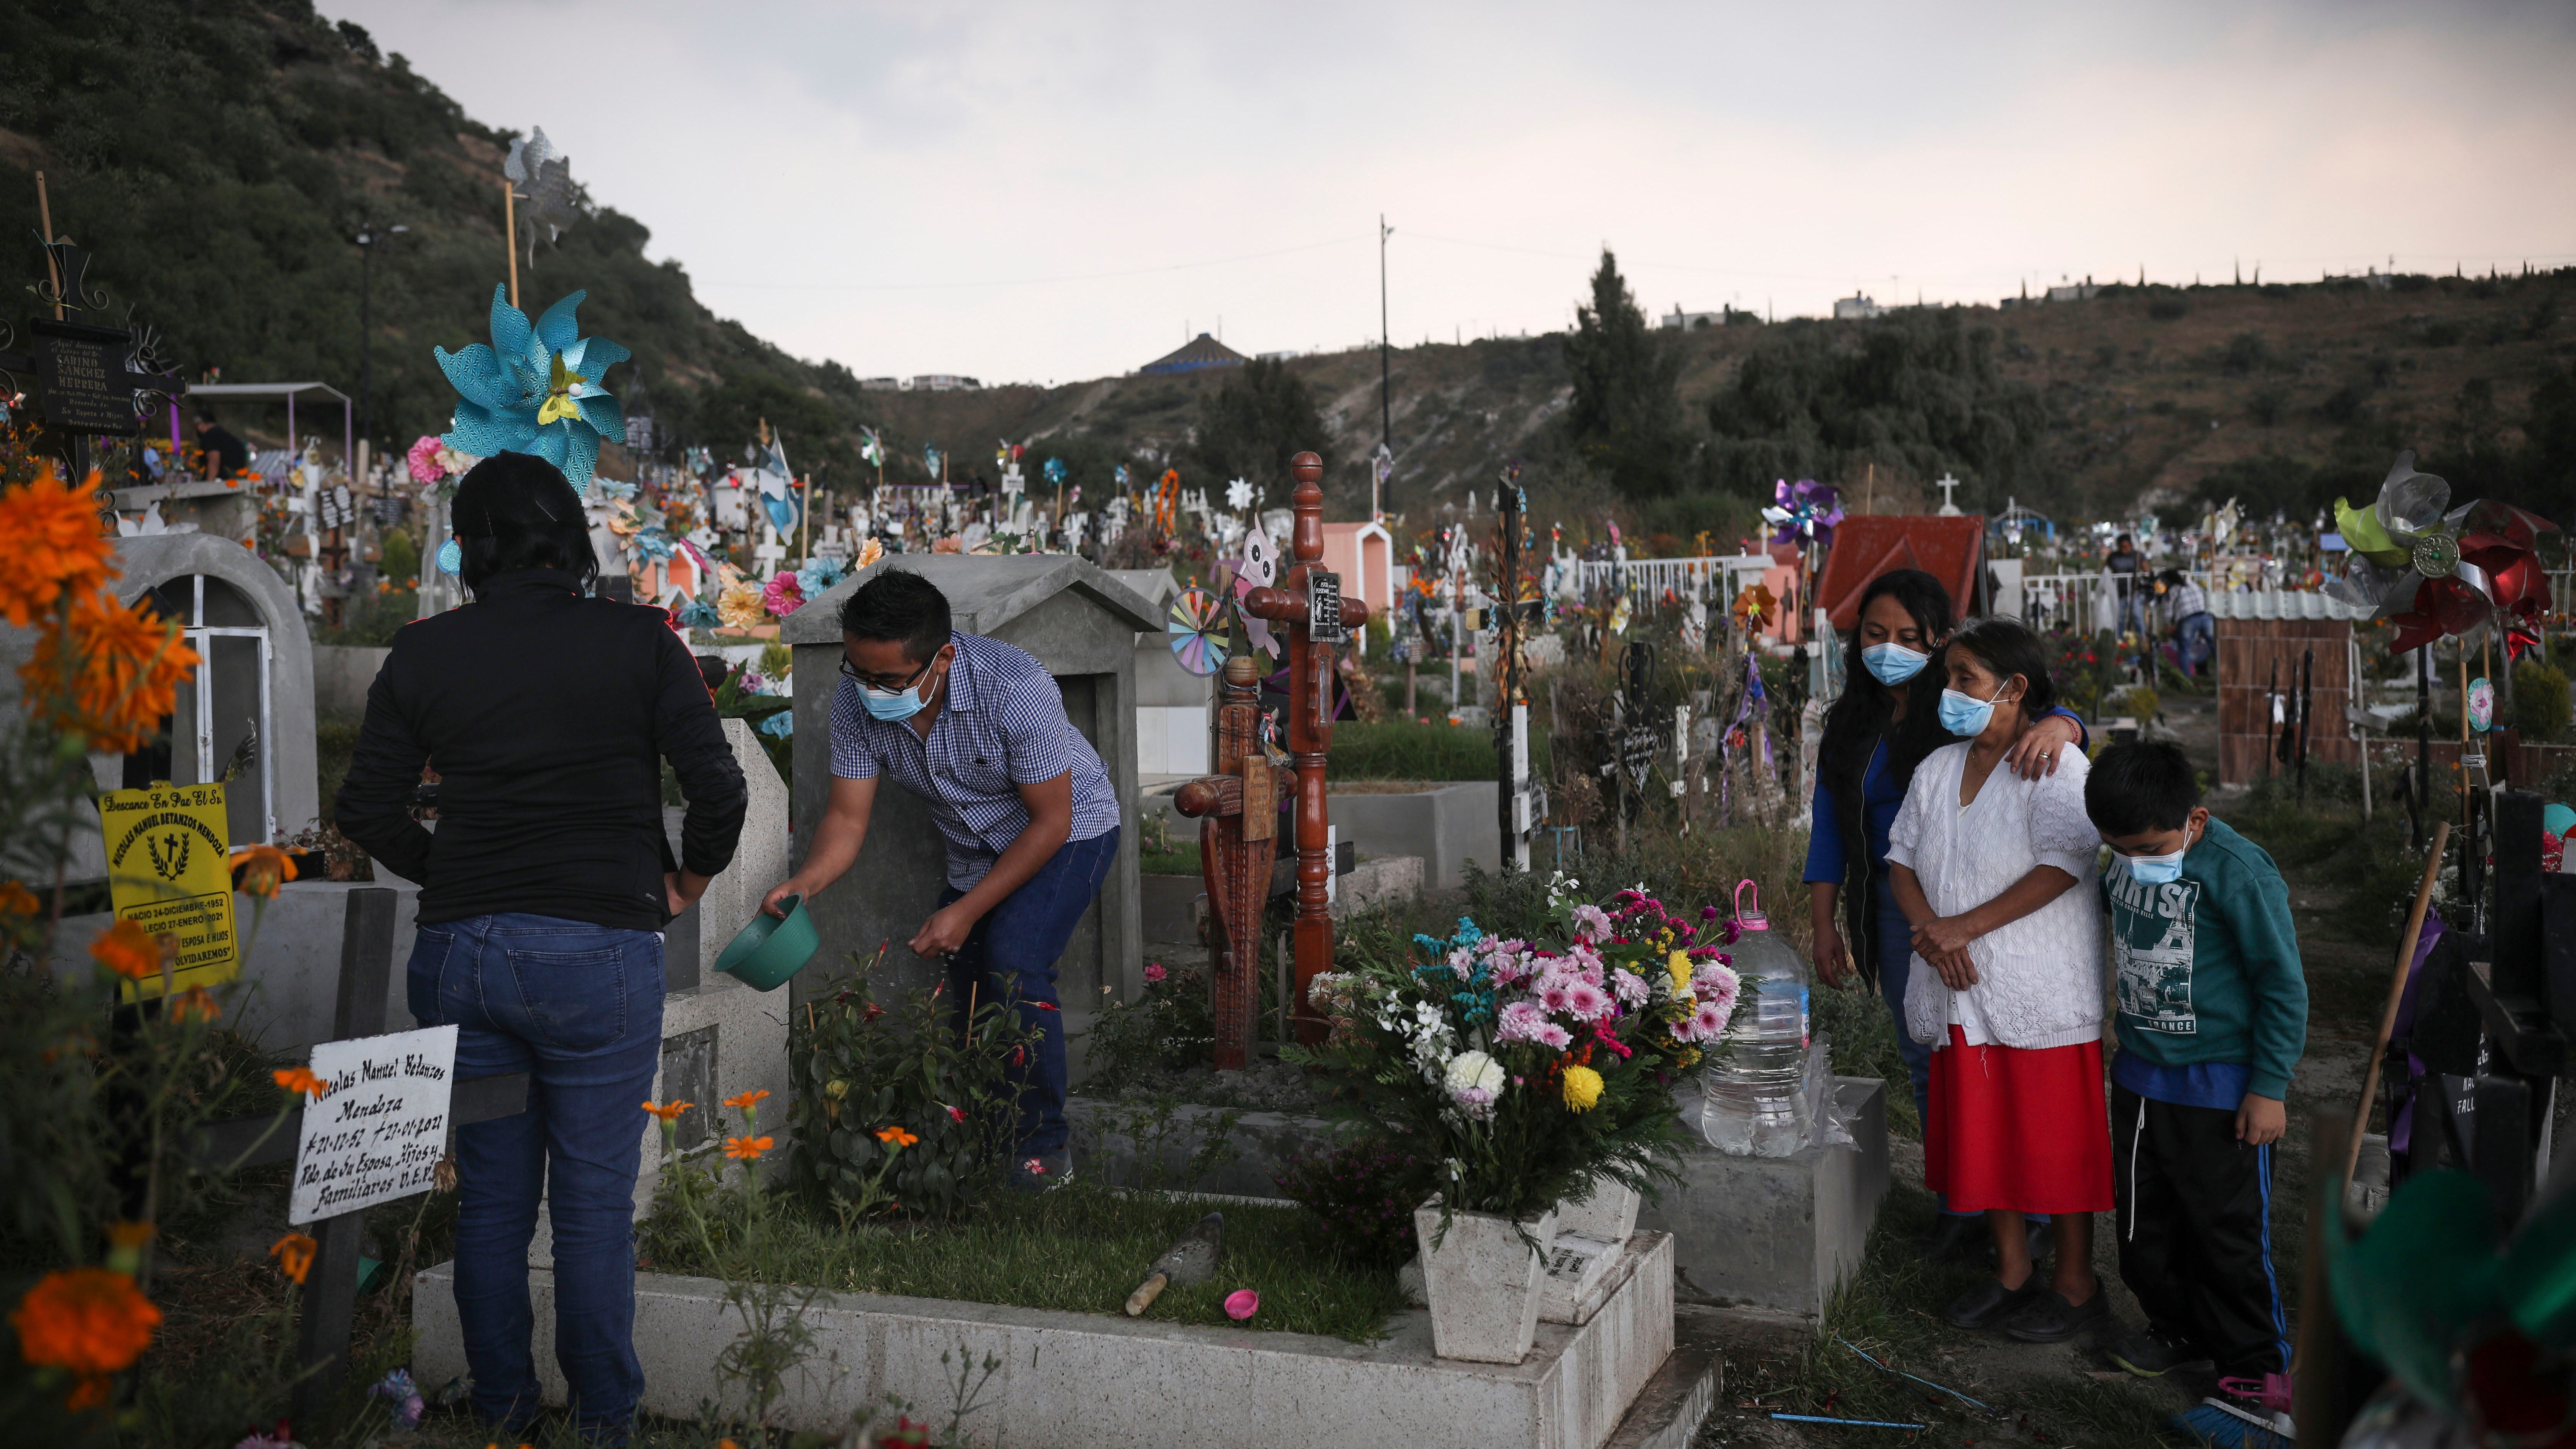 Family members tend to the grave of a relative in preparations for the Day of the Dead celebrations, at the Valle de Chalco municipal cemetery on the outskirts of Mexico City, Thursday, Oct. 28, 2021.